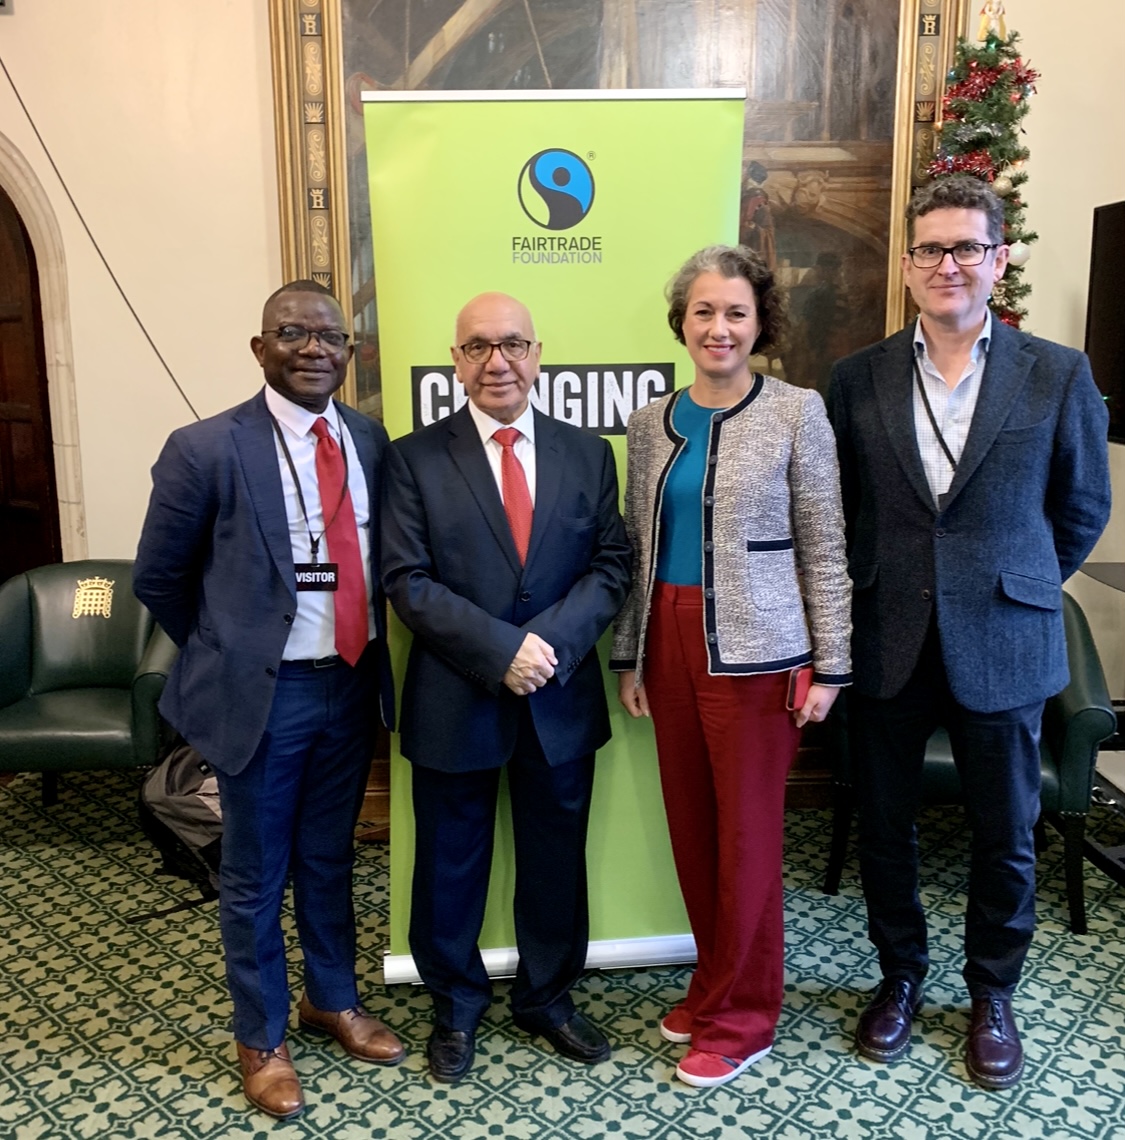 Pleasure to join the @FairtradeUK to discuss strategies for devising a trade policy that works for people and the planet. Strengthening UK aid abroad and ensuring businesses responsibly source goods is vital for a trade strategy fit for the 21st century.